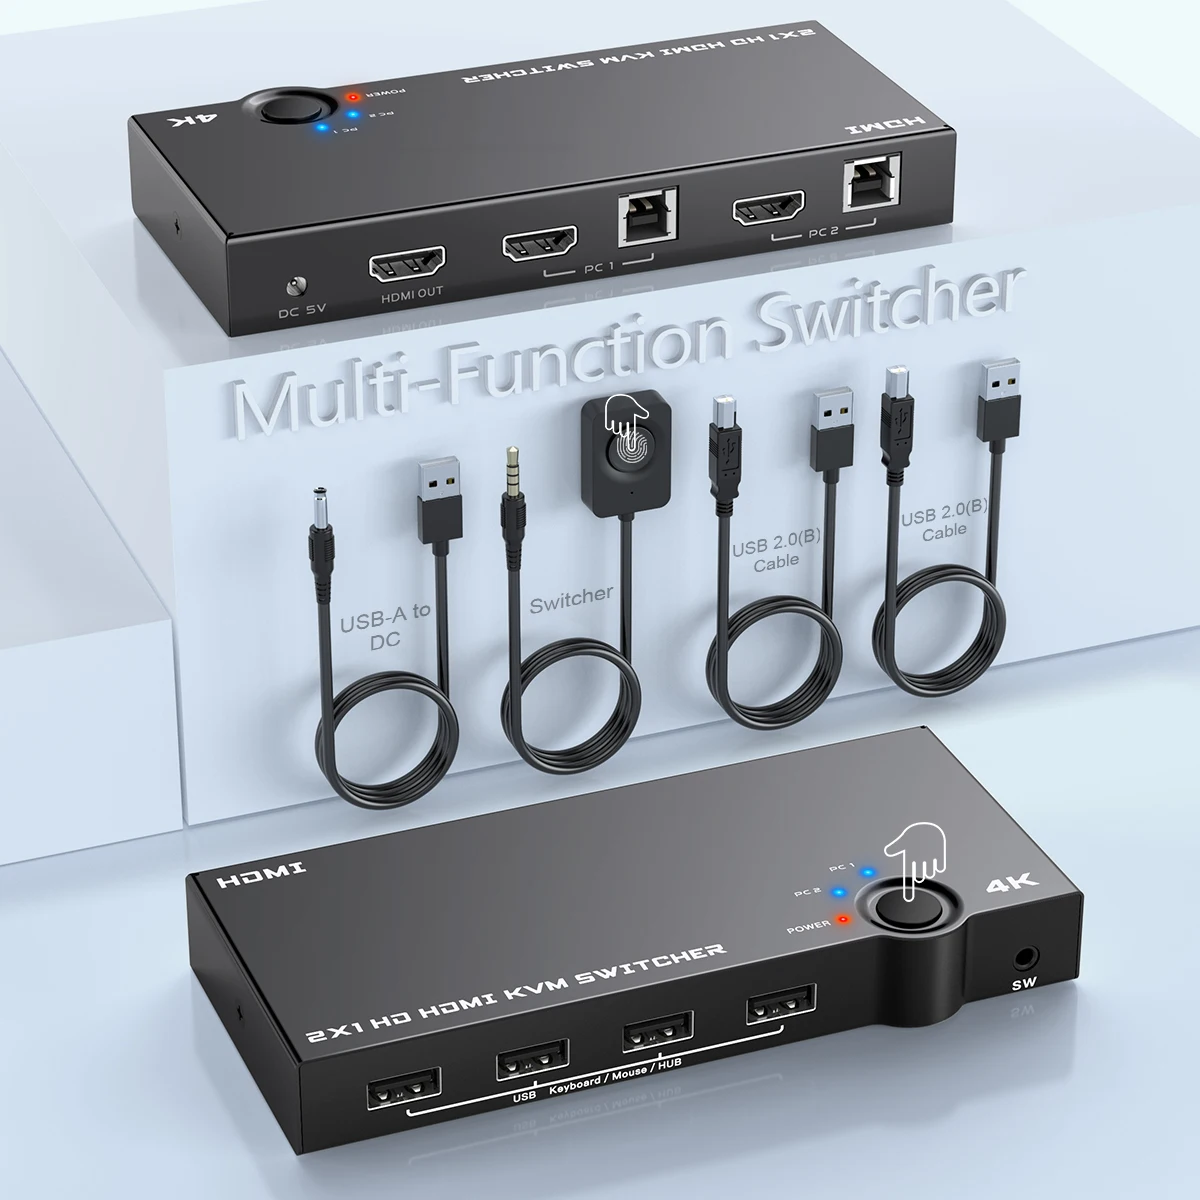 

OEM KVM Switcher HDMI USB KVM Switch for 2 Computers Sharing One HD Monitor and Keyboard Mouse Support 4K@60Hz